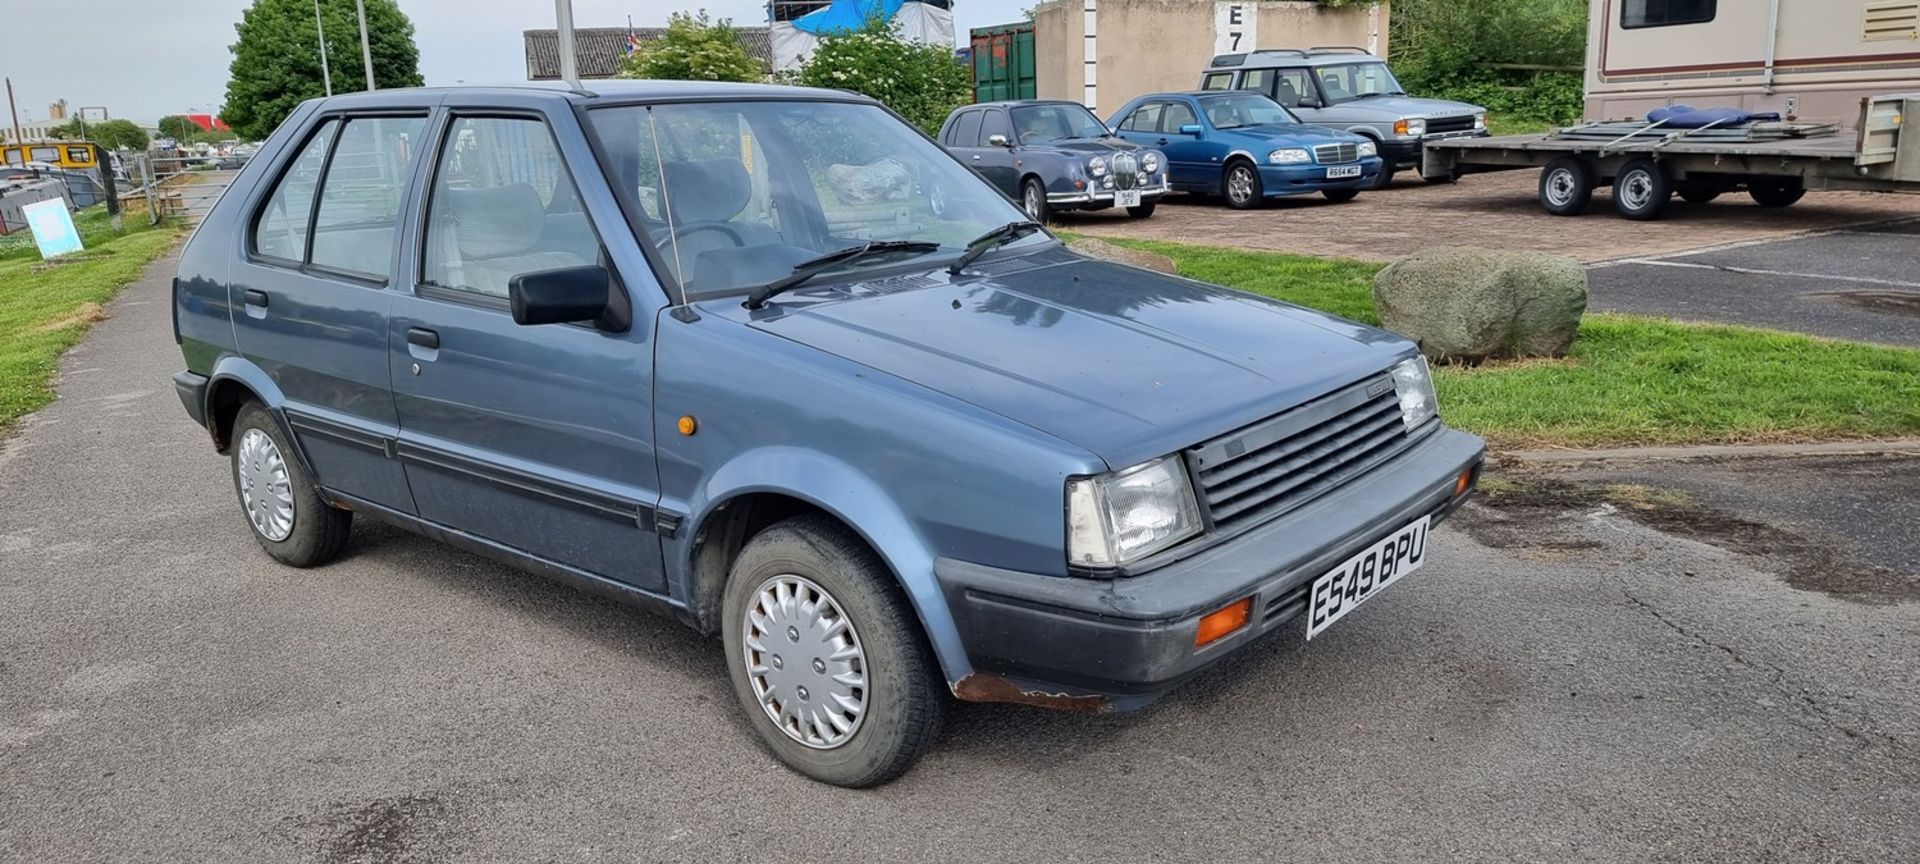 1987 Nissan Micra SGL automatic, 998cc. Registration number E549 BPU. Chassis number K10 429826.